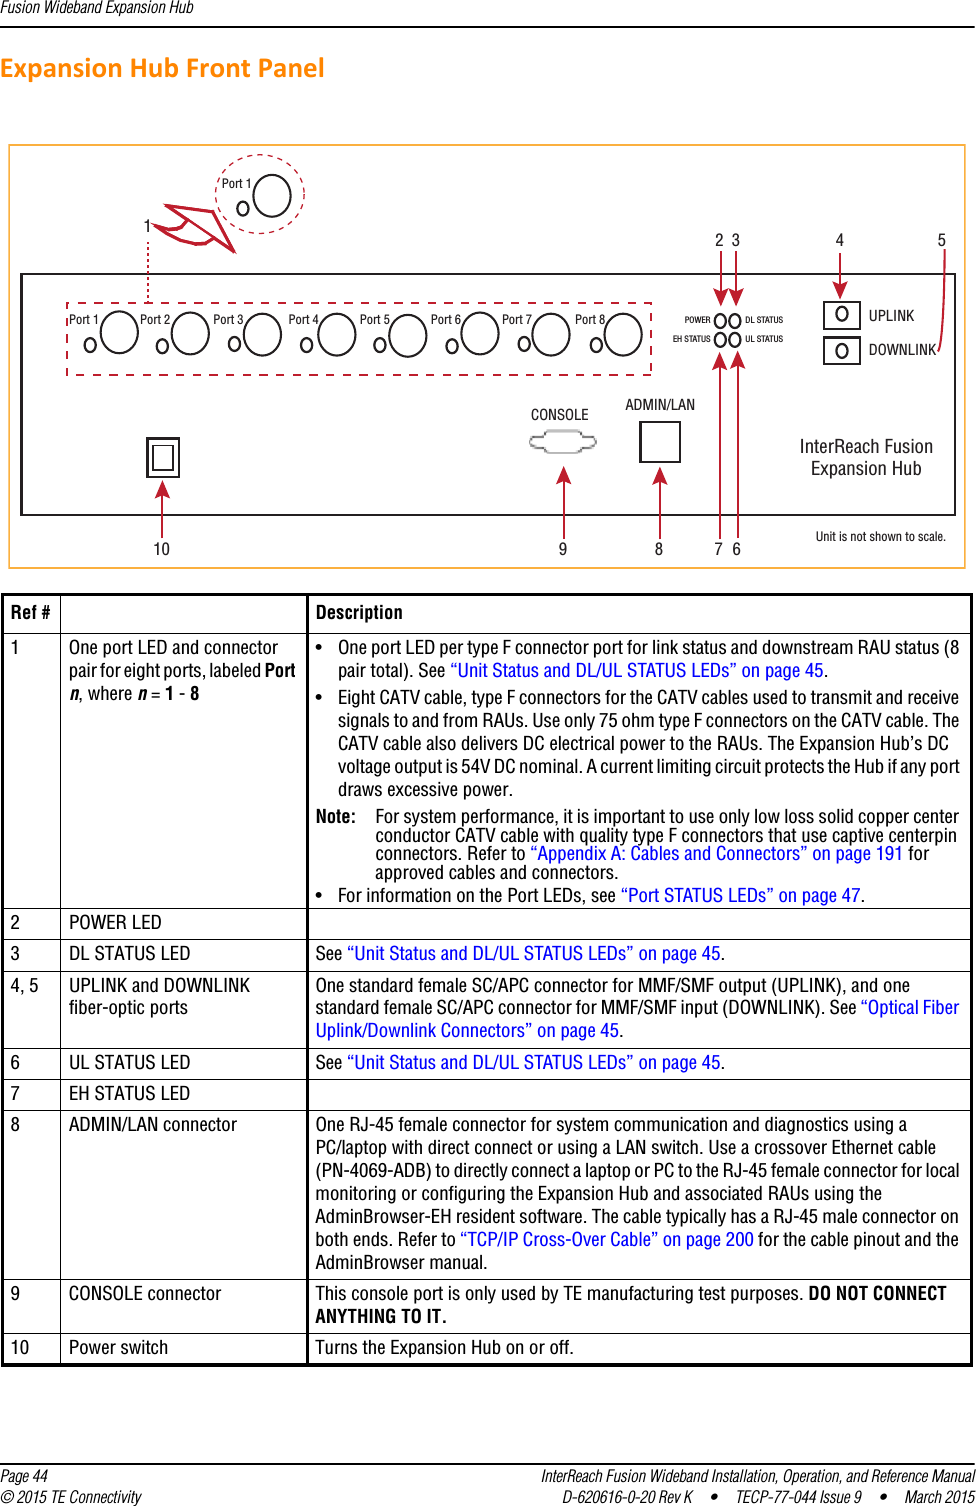 Fusion Wideband Expansion Hub  Page 44 InterReach Fusion Wideband Installation, Operation, and Reference Manual© 2015 TE Connectivity D-620616-0-20 Rev K  •  TECP-77-044 Issue 9  •  March 2015Expansion Hub Front PanelRef # Description1One port LED and connector pair for eight ports, labeled Port n, where n = 1 - 8• One port LED per type F connector port for link status and downstream RAU status (8 pair total). See “Unit Status and DL/UL STATUS LEDs” on page 45.• Eight CATV cable, type F connectors for the CATV cables used to transmit and receive signals to and from RAUs. Use only 75 ohm type F connectors on the CATV cable. The CATV cable also delivers DC electrical power to the RAUs. The Expansion Hub’s DC voltage output is 54V DC nominal. A current limiting circuit protects the Hub if any port draws excessive power.Note: For system performance, it is important to use only low loss solid copper center conductor CATV cable with quality type F connectors that use captive centerpin connectors. Refer to “Appendix A: Cables and Connectors” on page 191 for approved cables and connectors.• For information on the Port LEDs, see “Port STATUS LEDs” on page 47.2POWER LED3DL STATUS LED See “Unit Status and DL/UL STATUS LEDs” on page 45.4, 5 UPLINK and DOWNLINK fiber-optic portsOne standard female SC/APC connector for MMF/SMF output (UPLINK), and one standard female SC/APC connector for MMF/SMF input (DOWNLINK). See “Optical Fiber Uplink/Downlink Connectors” on page 45.6UL STATUS LED See “Unit Status and DL/UL STATUS LEDs” on page 45.7EH STATUS LED8ADMIN/LAN connector One RJ-45 female connector for system communication and diagnostics using a PC/laptop with direct connect or using a LAN switch. Use a crossover Ethernet cable (PN-4069-ADB) to directly connect a laptop or PC to the RJ-45 female connector for local monitoring or configuring the Expansion Hub and associated RAUs using the AdminBrowser-EH resident software. The cable typically has a RJ-45 male connector on both ends. Refer to “TCP/IP Cross-Over Cable” on page 200 for the cable pinout and the AdminBrowser manual.9CONSOLE connector This console port is only used by TE manufacturing test purposes. DO NOT CONNECT ANYTHING TO IT.10 Power switch Turns the Expansion Hub on or off.1Unit is not shown to scale.Port 1CONSOLEPort 2 Port 3 Port 4 Port 5 Port 6 Port 7 Port 8 UPLINKDOWNLINKInterReach FusionExpansion HubADMIN/LANPOWEREH STATUSDL STATUSUL STATUSPort 12 3 48910 675